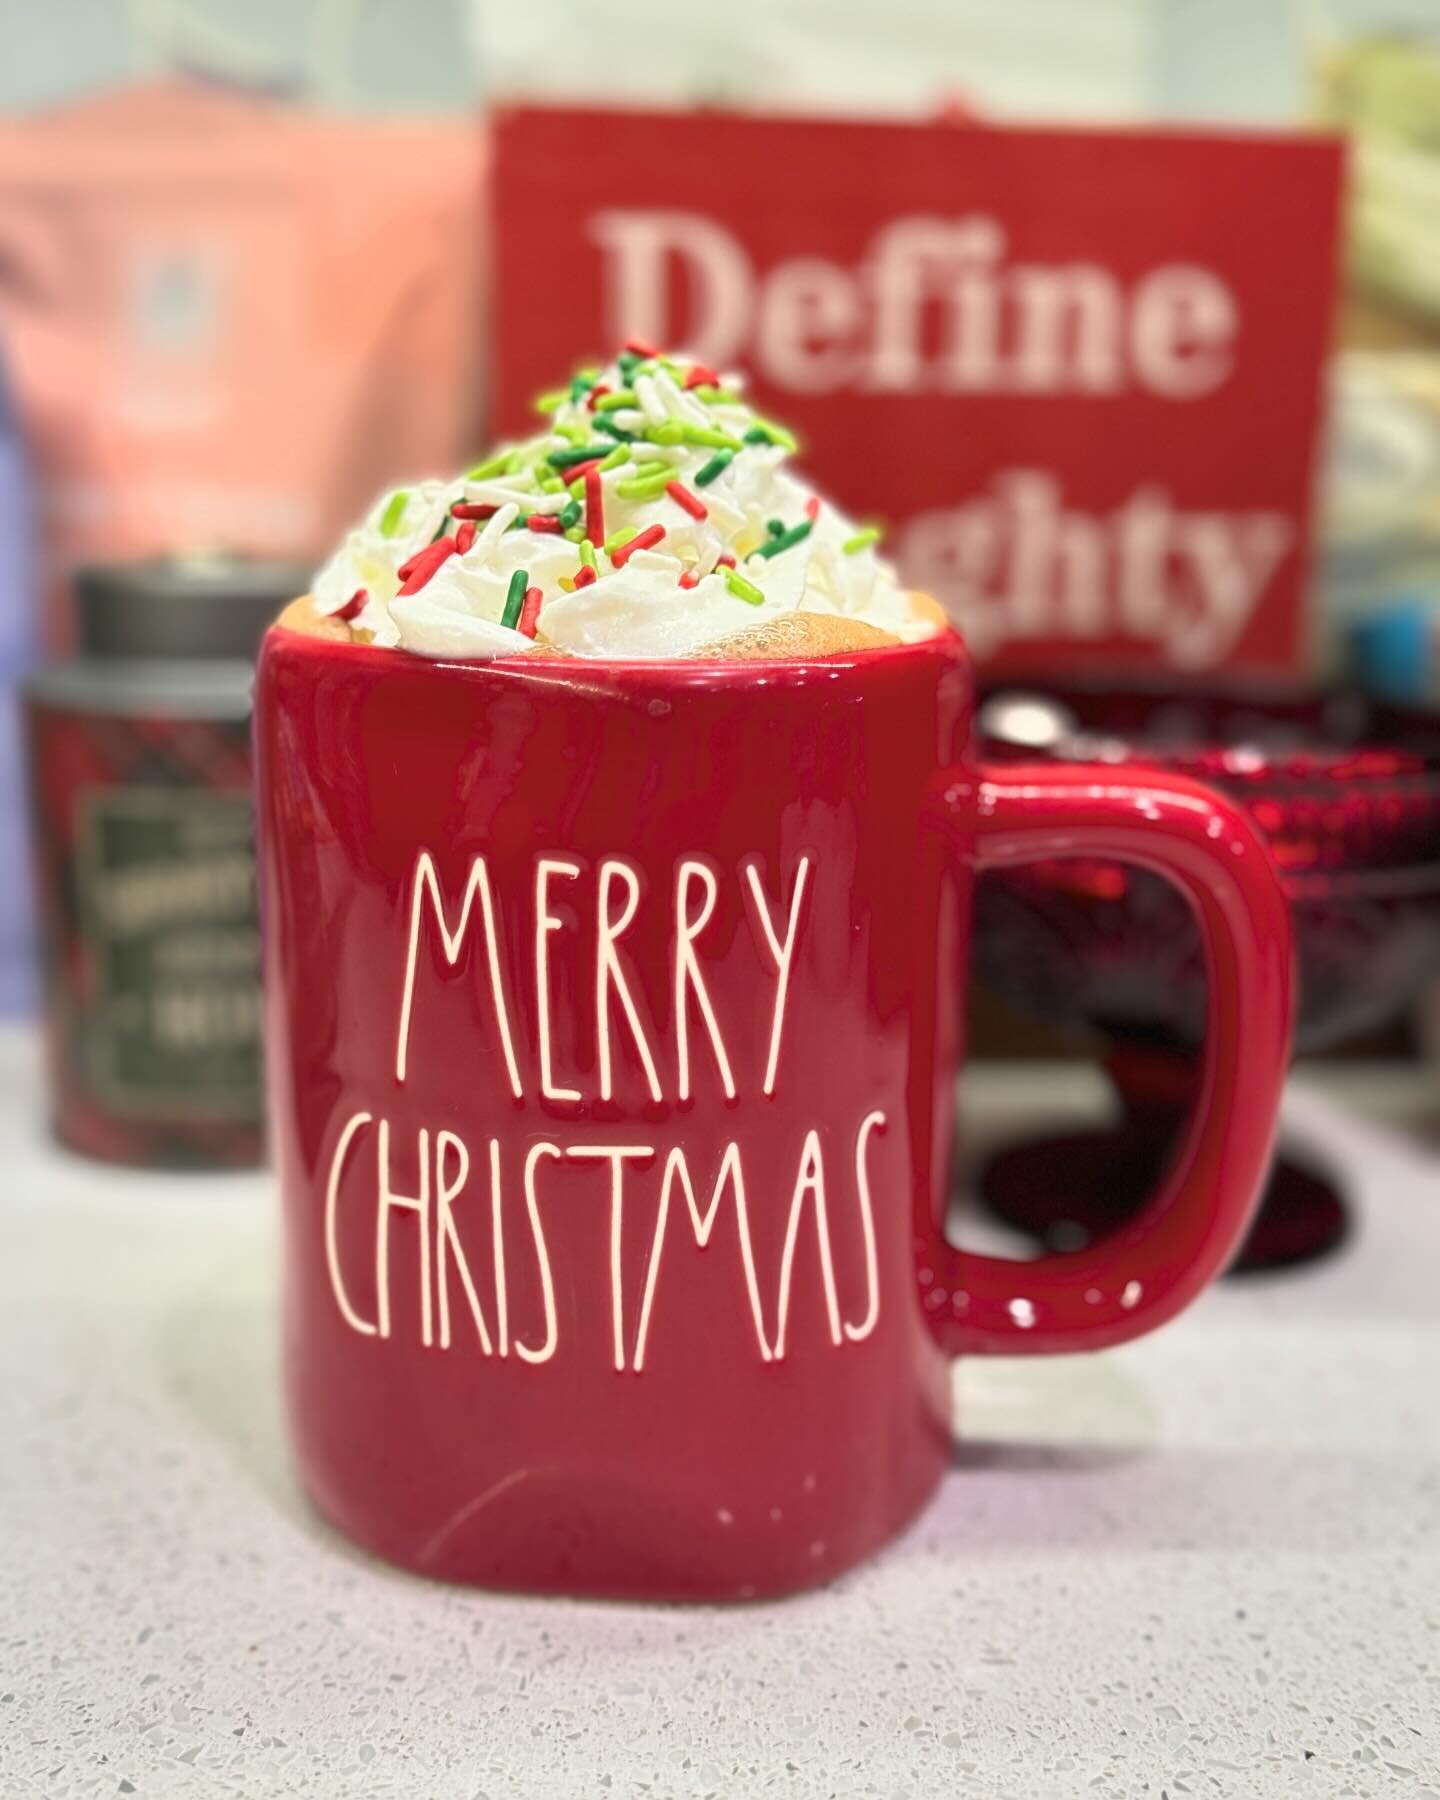 Hope your day was merry and bright!! Merry Christmas! 🎄🎁 #ᴄʜʀɪsᴛᴍᴀs2023  #merrychristmas🎄 #happychristmas #raedunnchristmasmugs